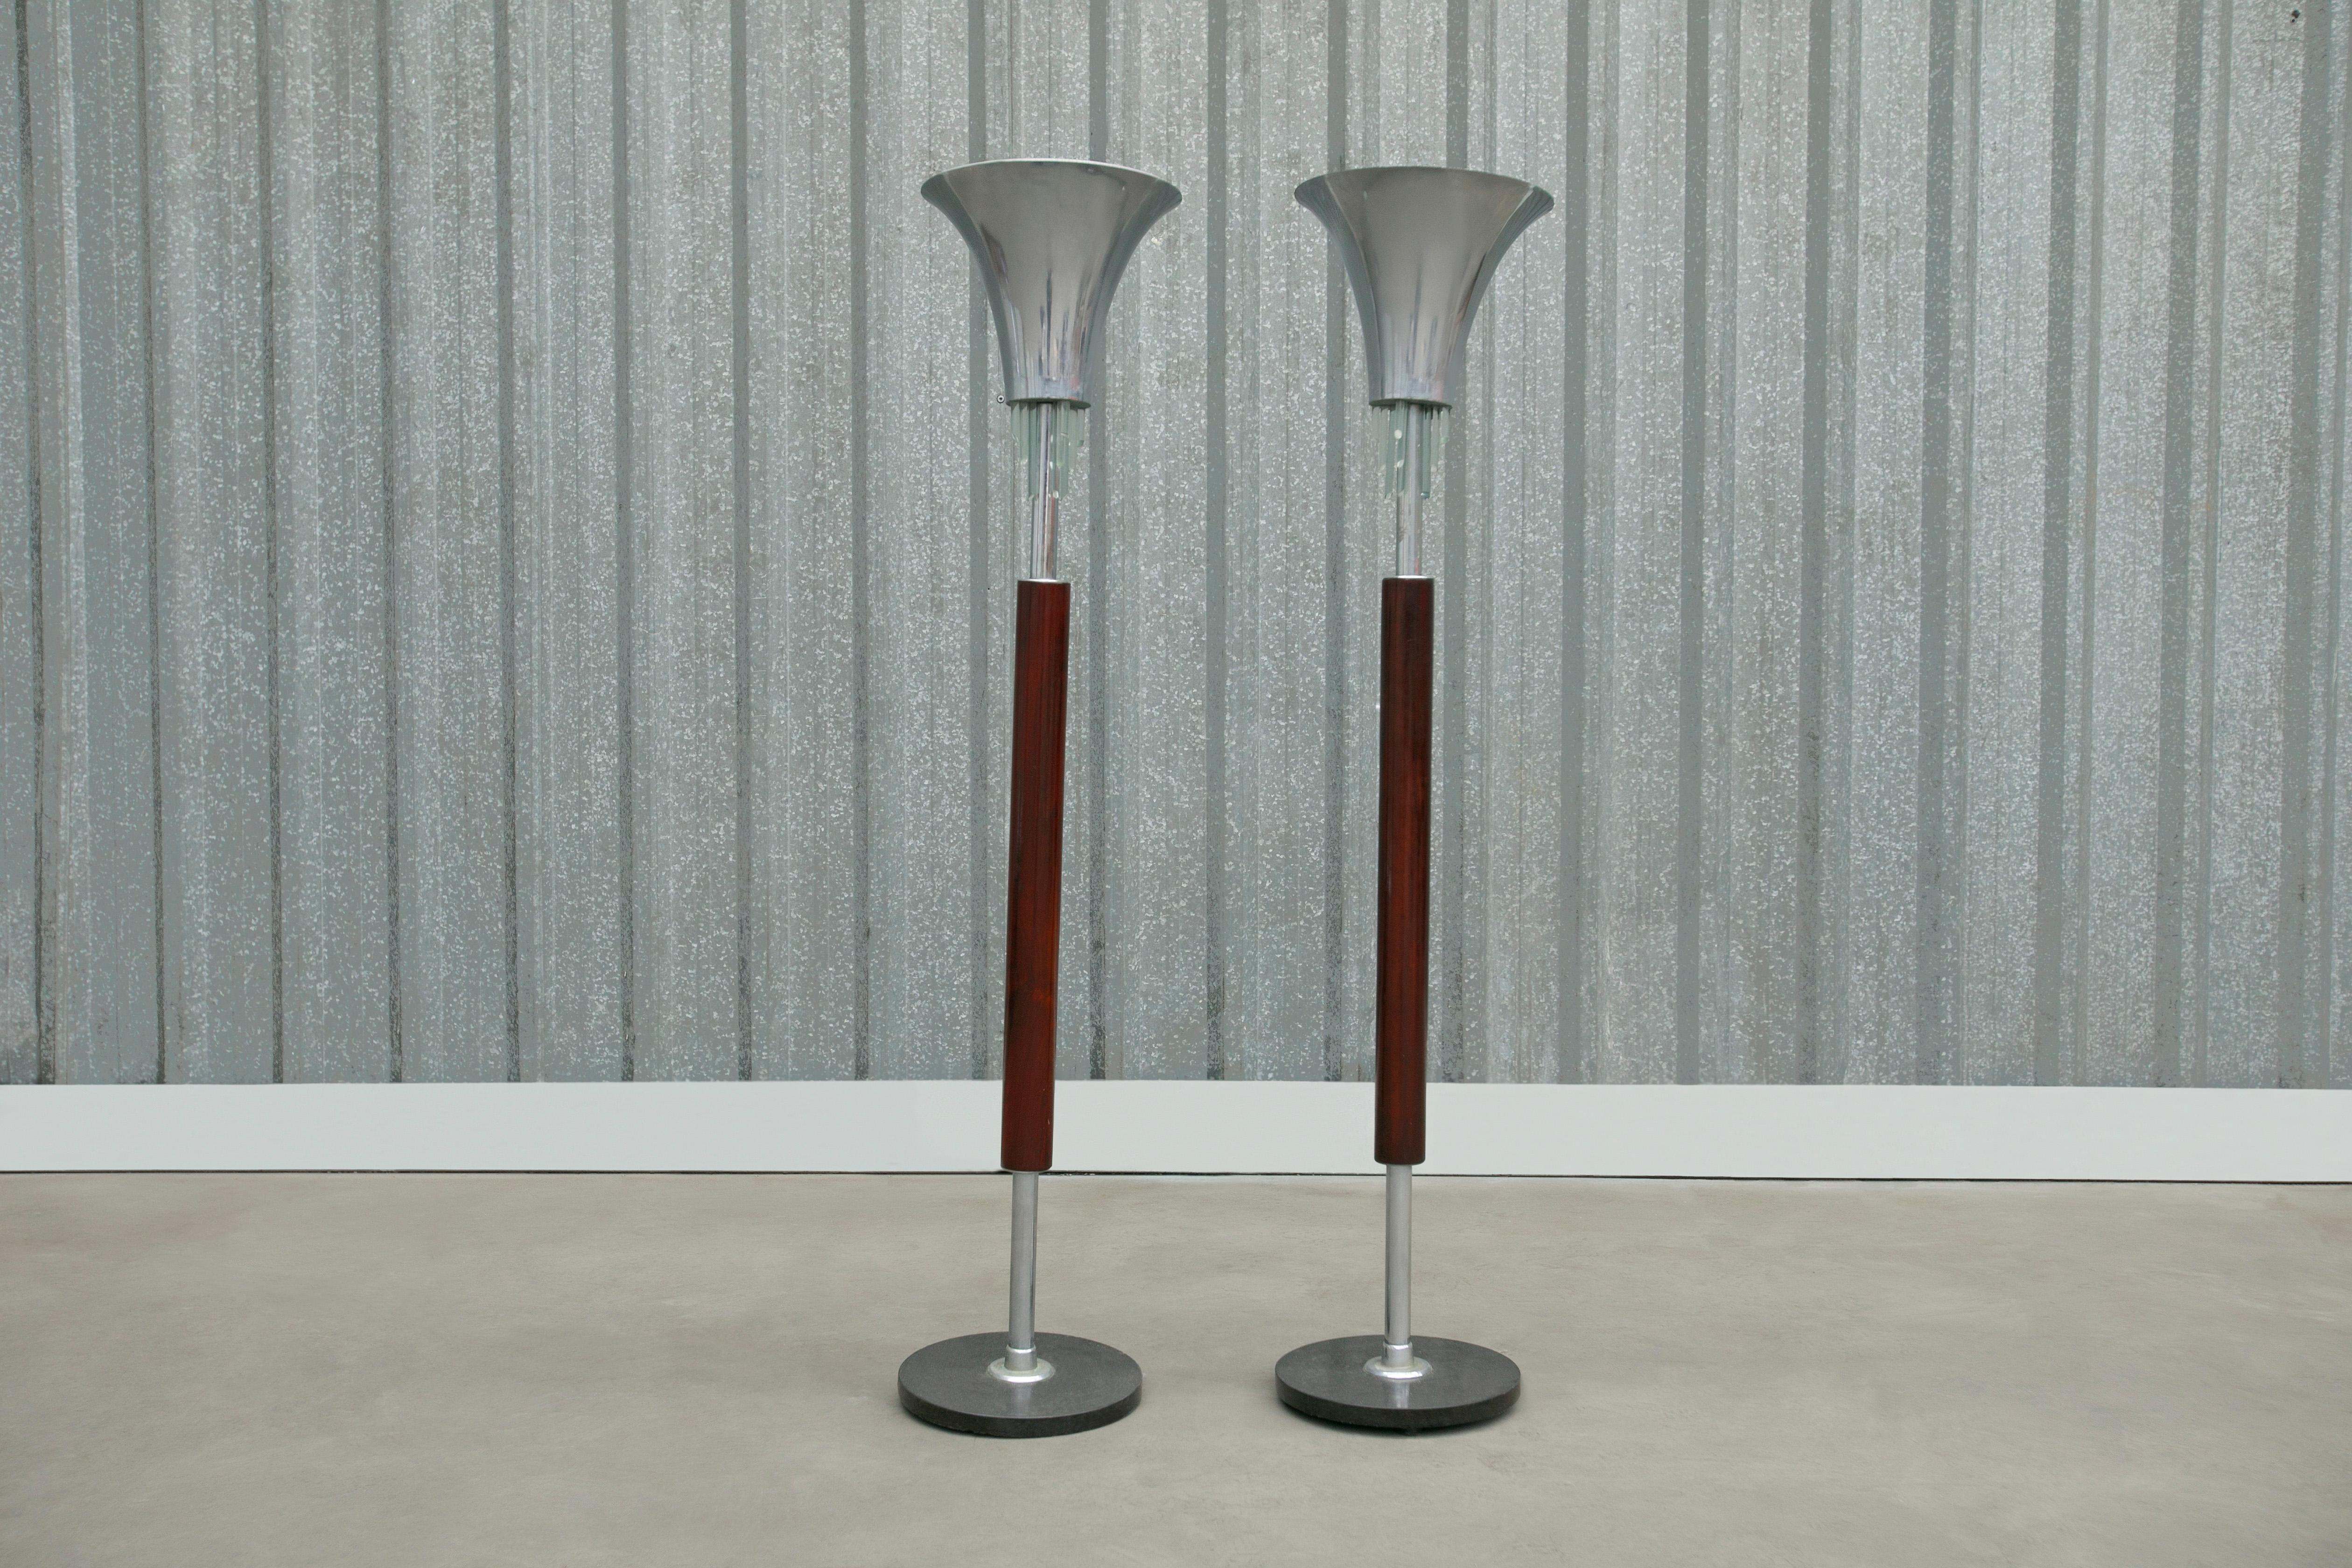 This floor lamp set is made in Brazilian rosewood, crystal and chrome. It was made in Brazil during the 1940s and is a great example of Brazilian Art Deco style featuring symmetrical, geometric and streamlined lines and the use of a tropical wood